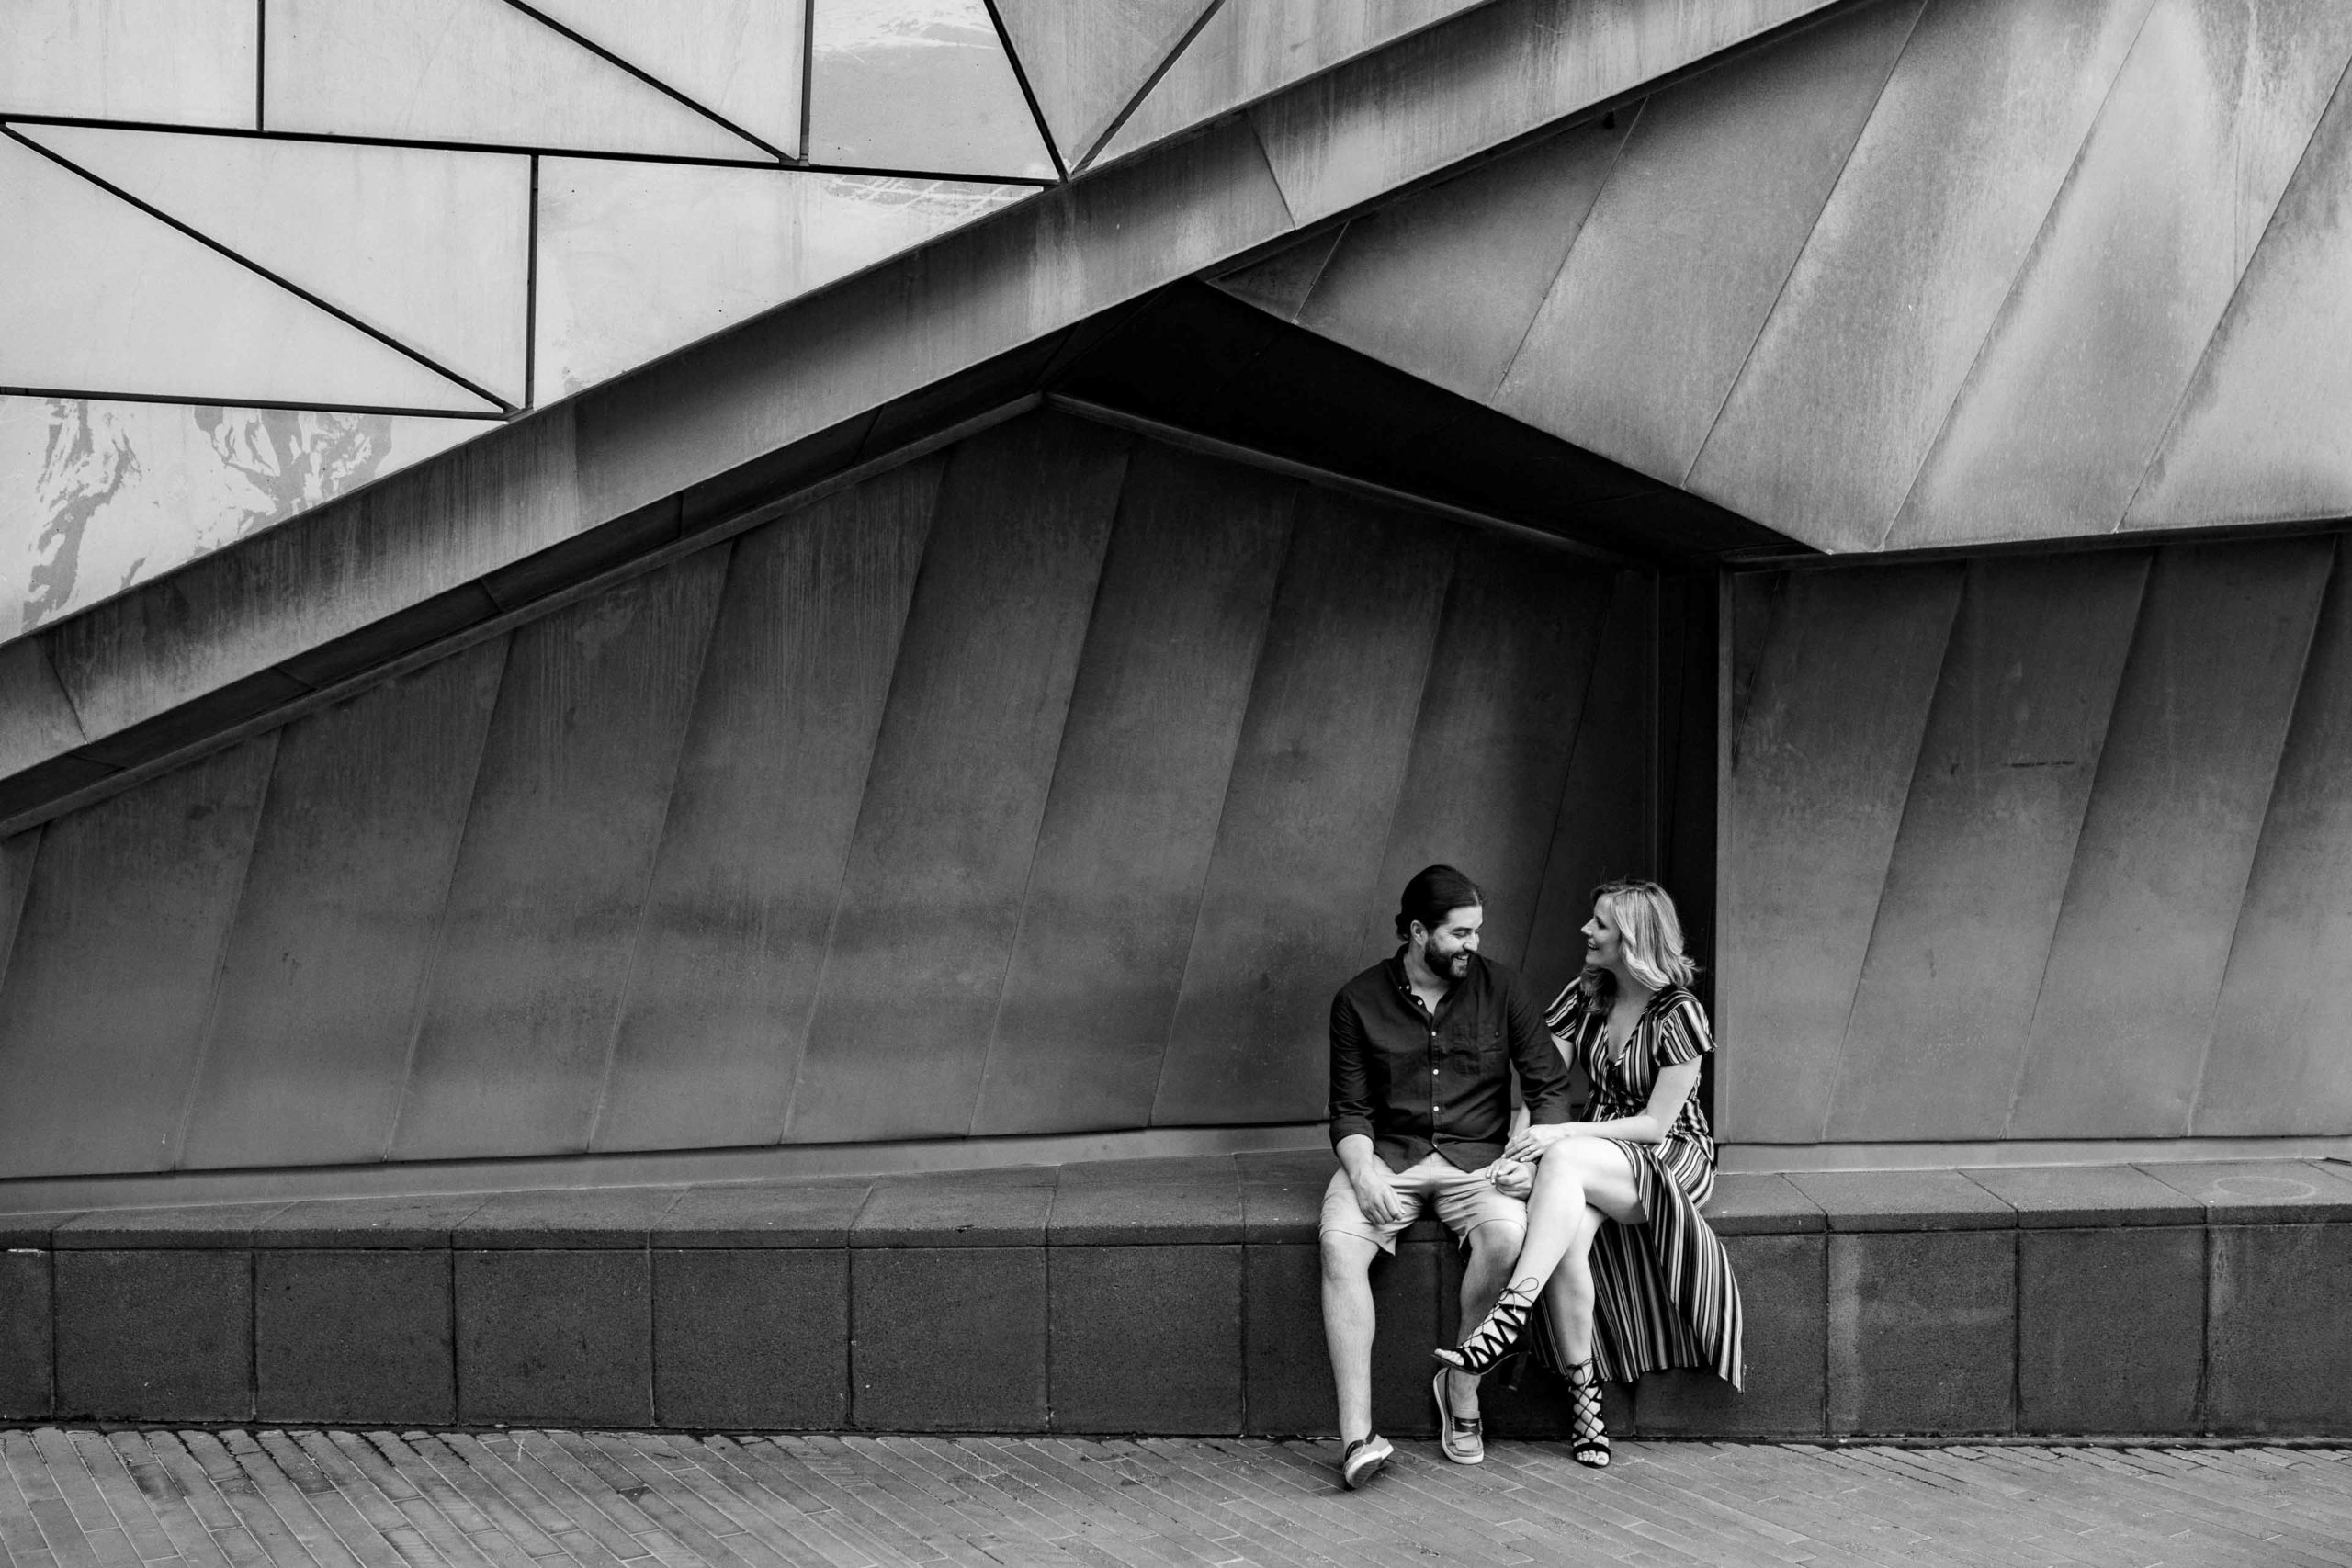 Federation Square Engagement photography